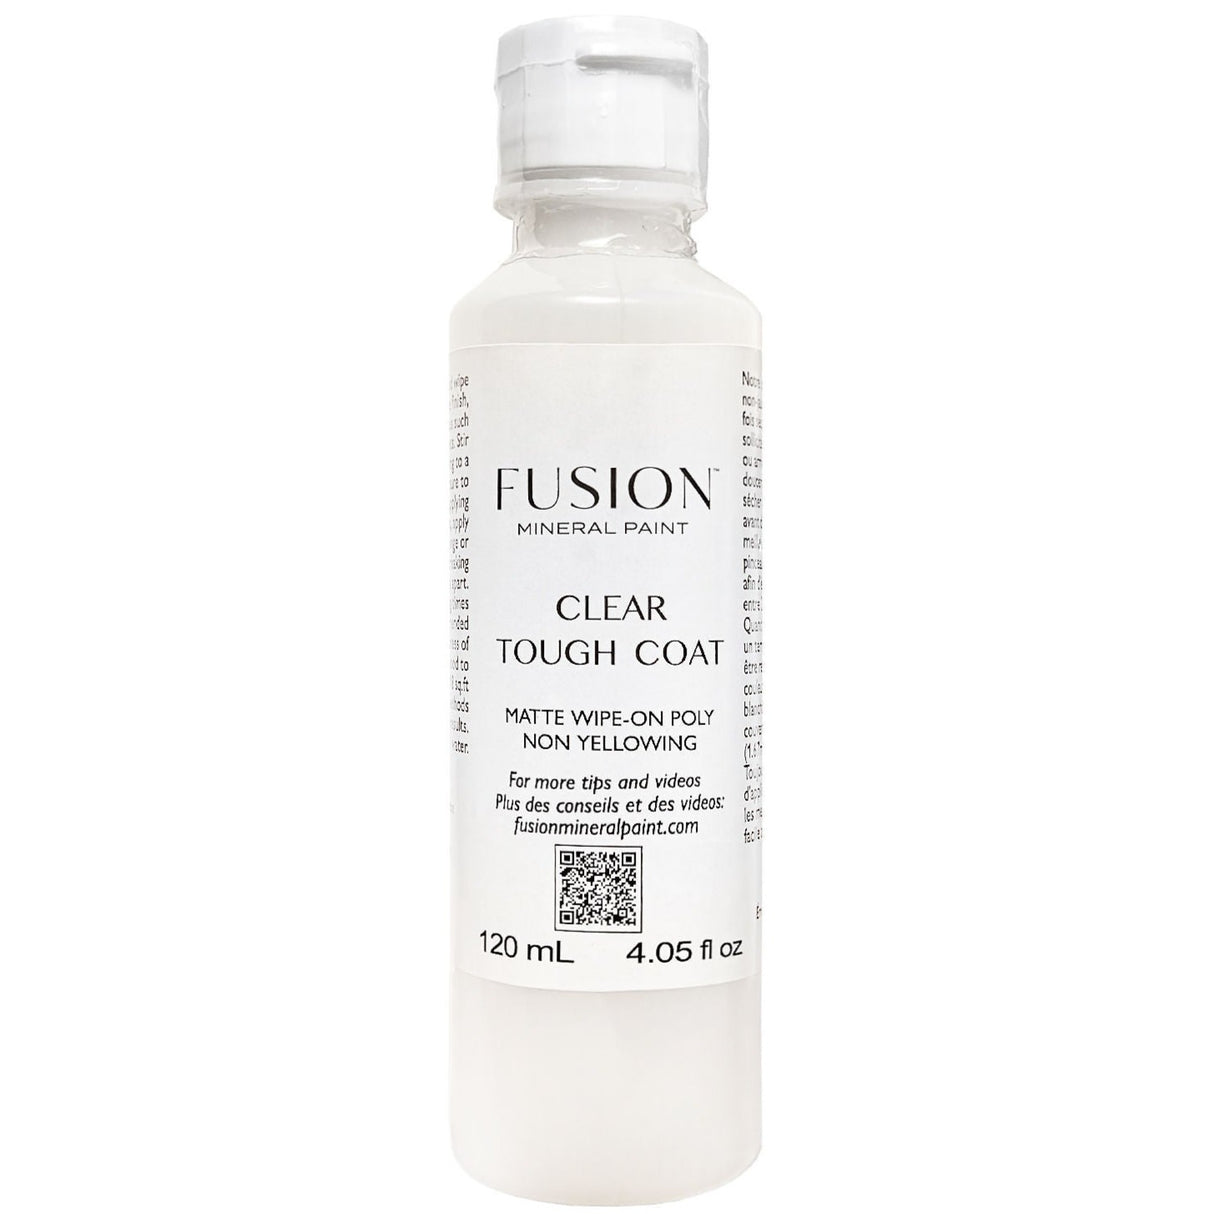 MATTE Clear Tough Coat Wipe-On Poly by Fusion Mineral Paint